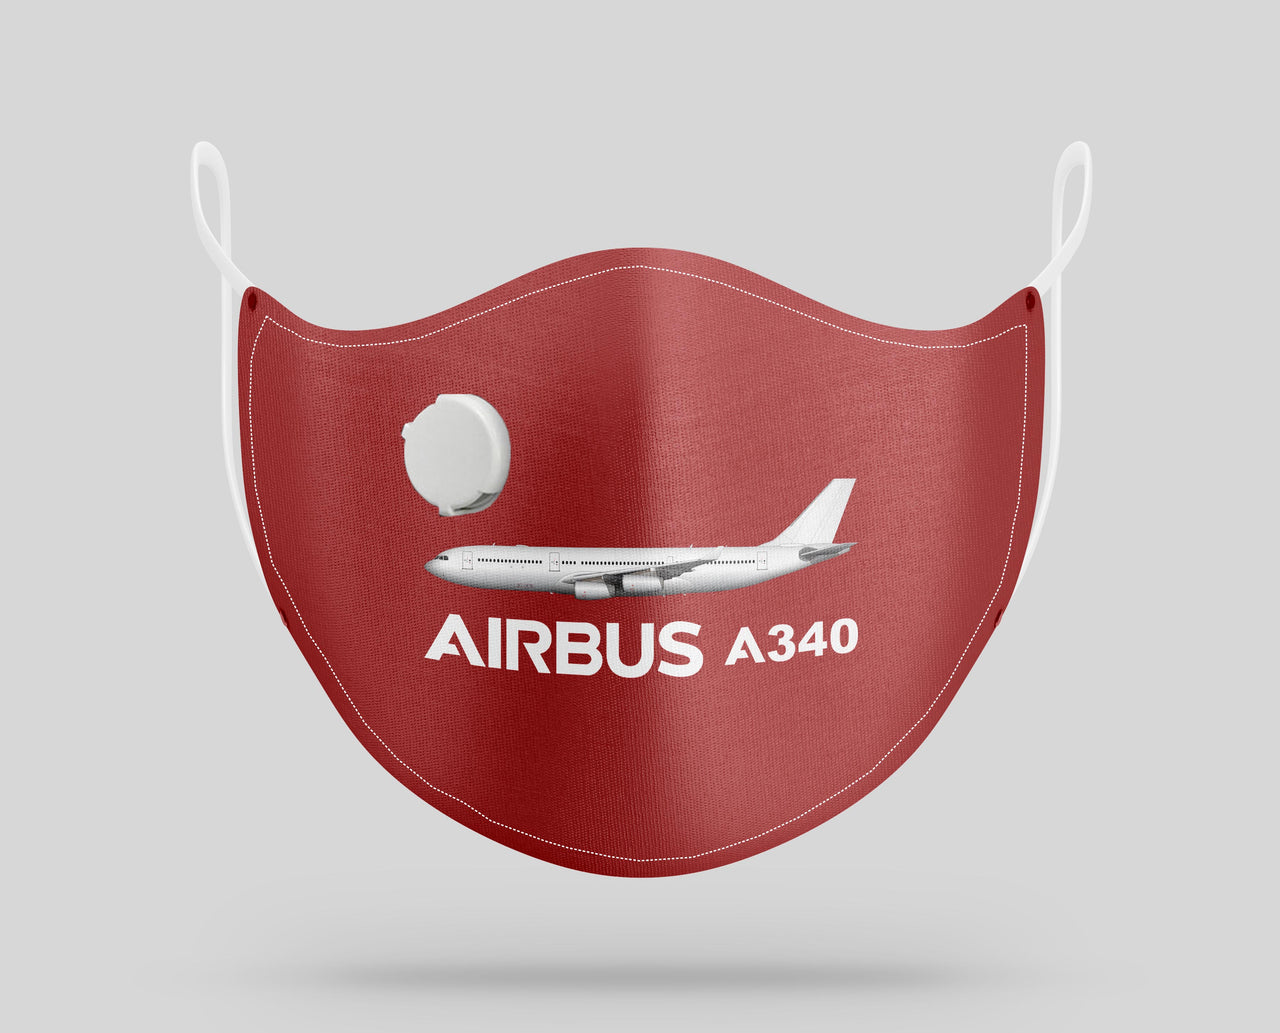 The Airbus A340 Designed Face Masks